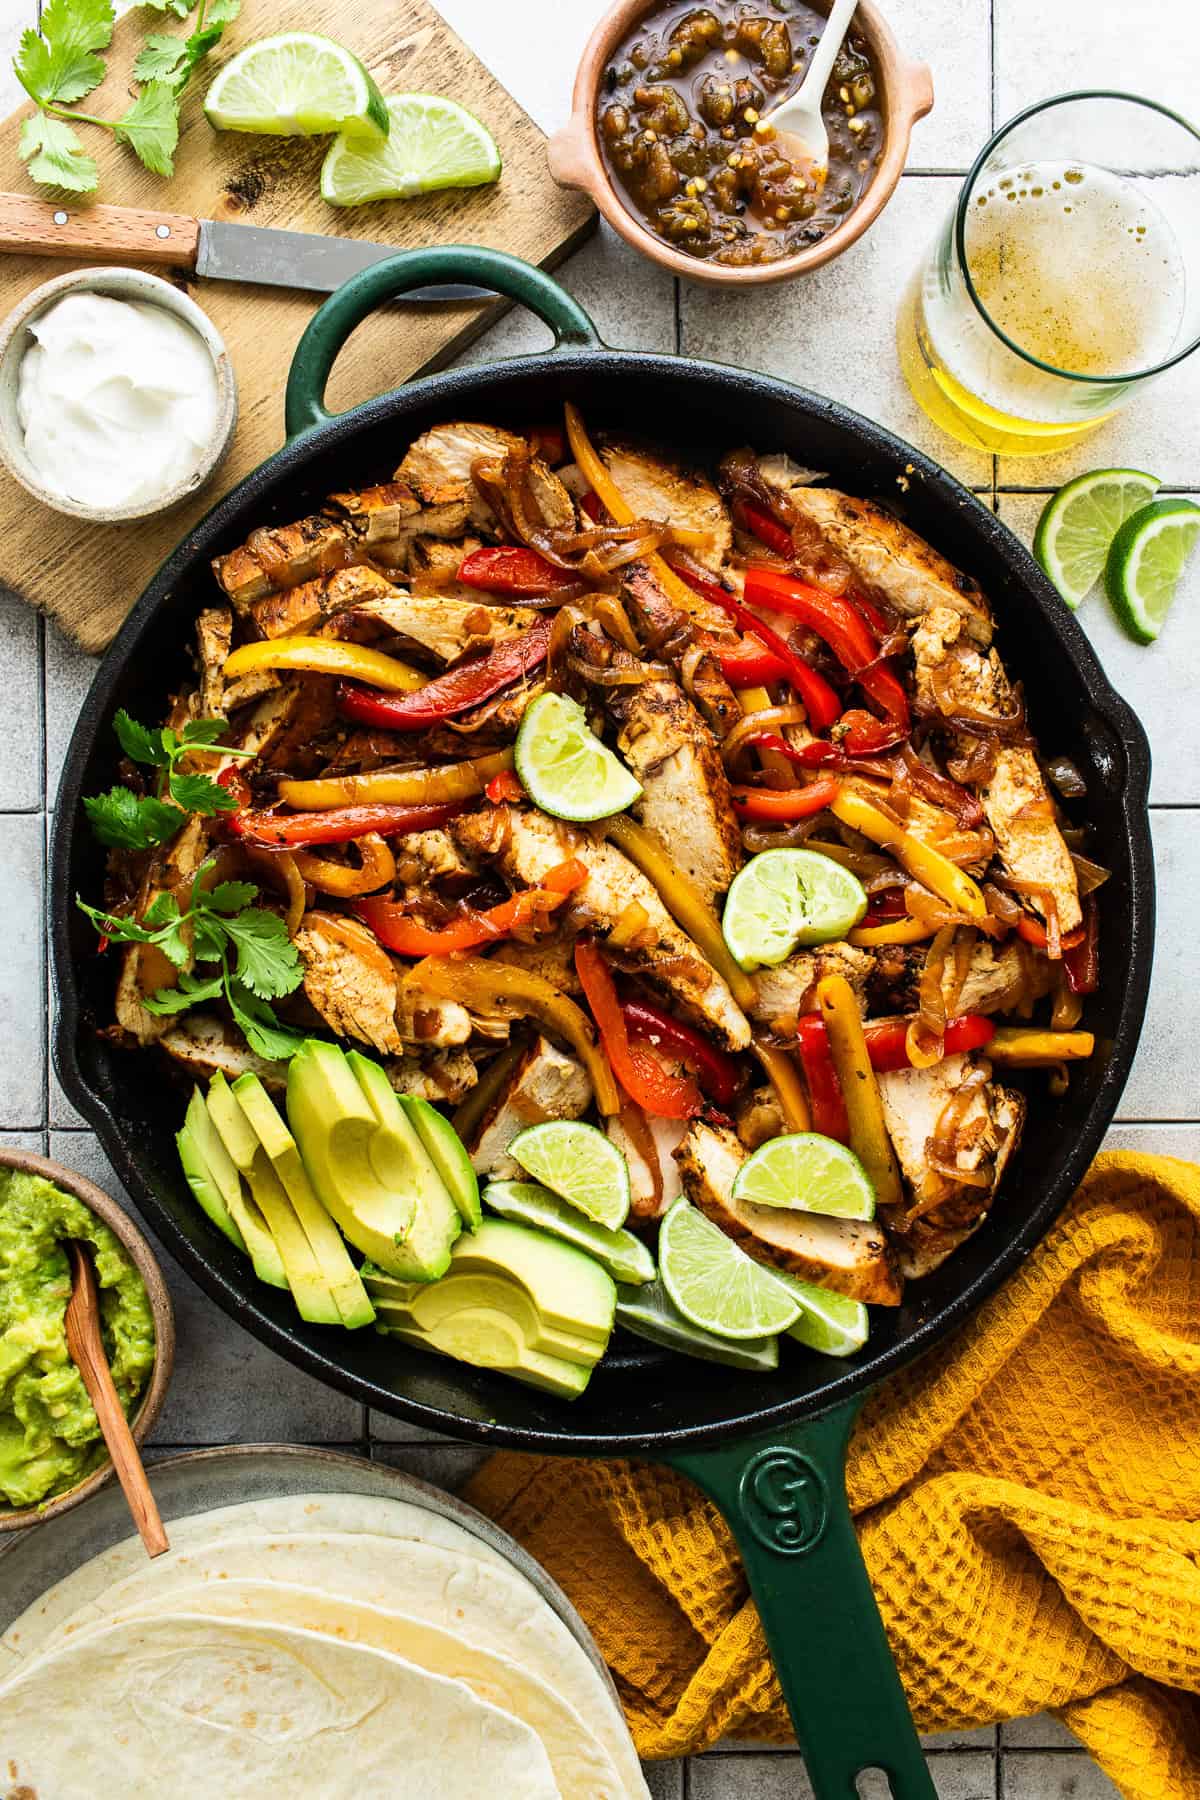 Chicken fajitas in a skillet topped with limes, cilantro, and avocados.